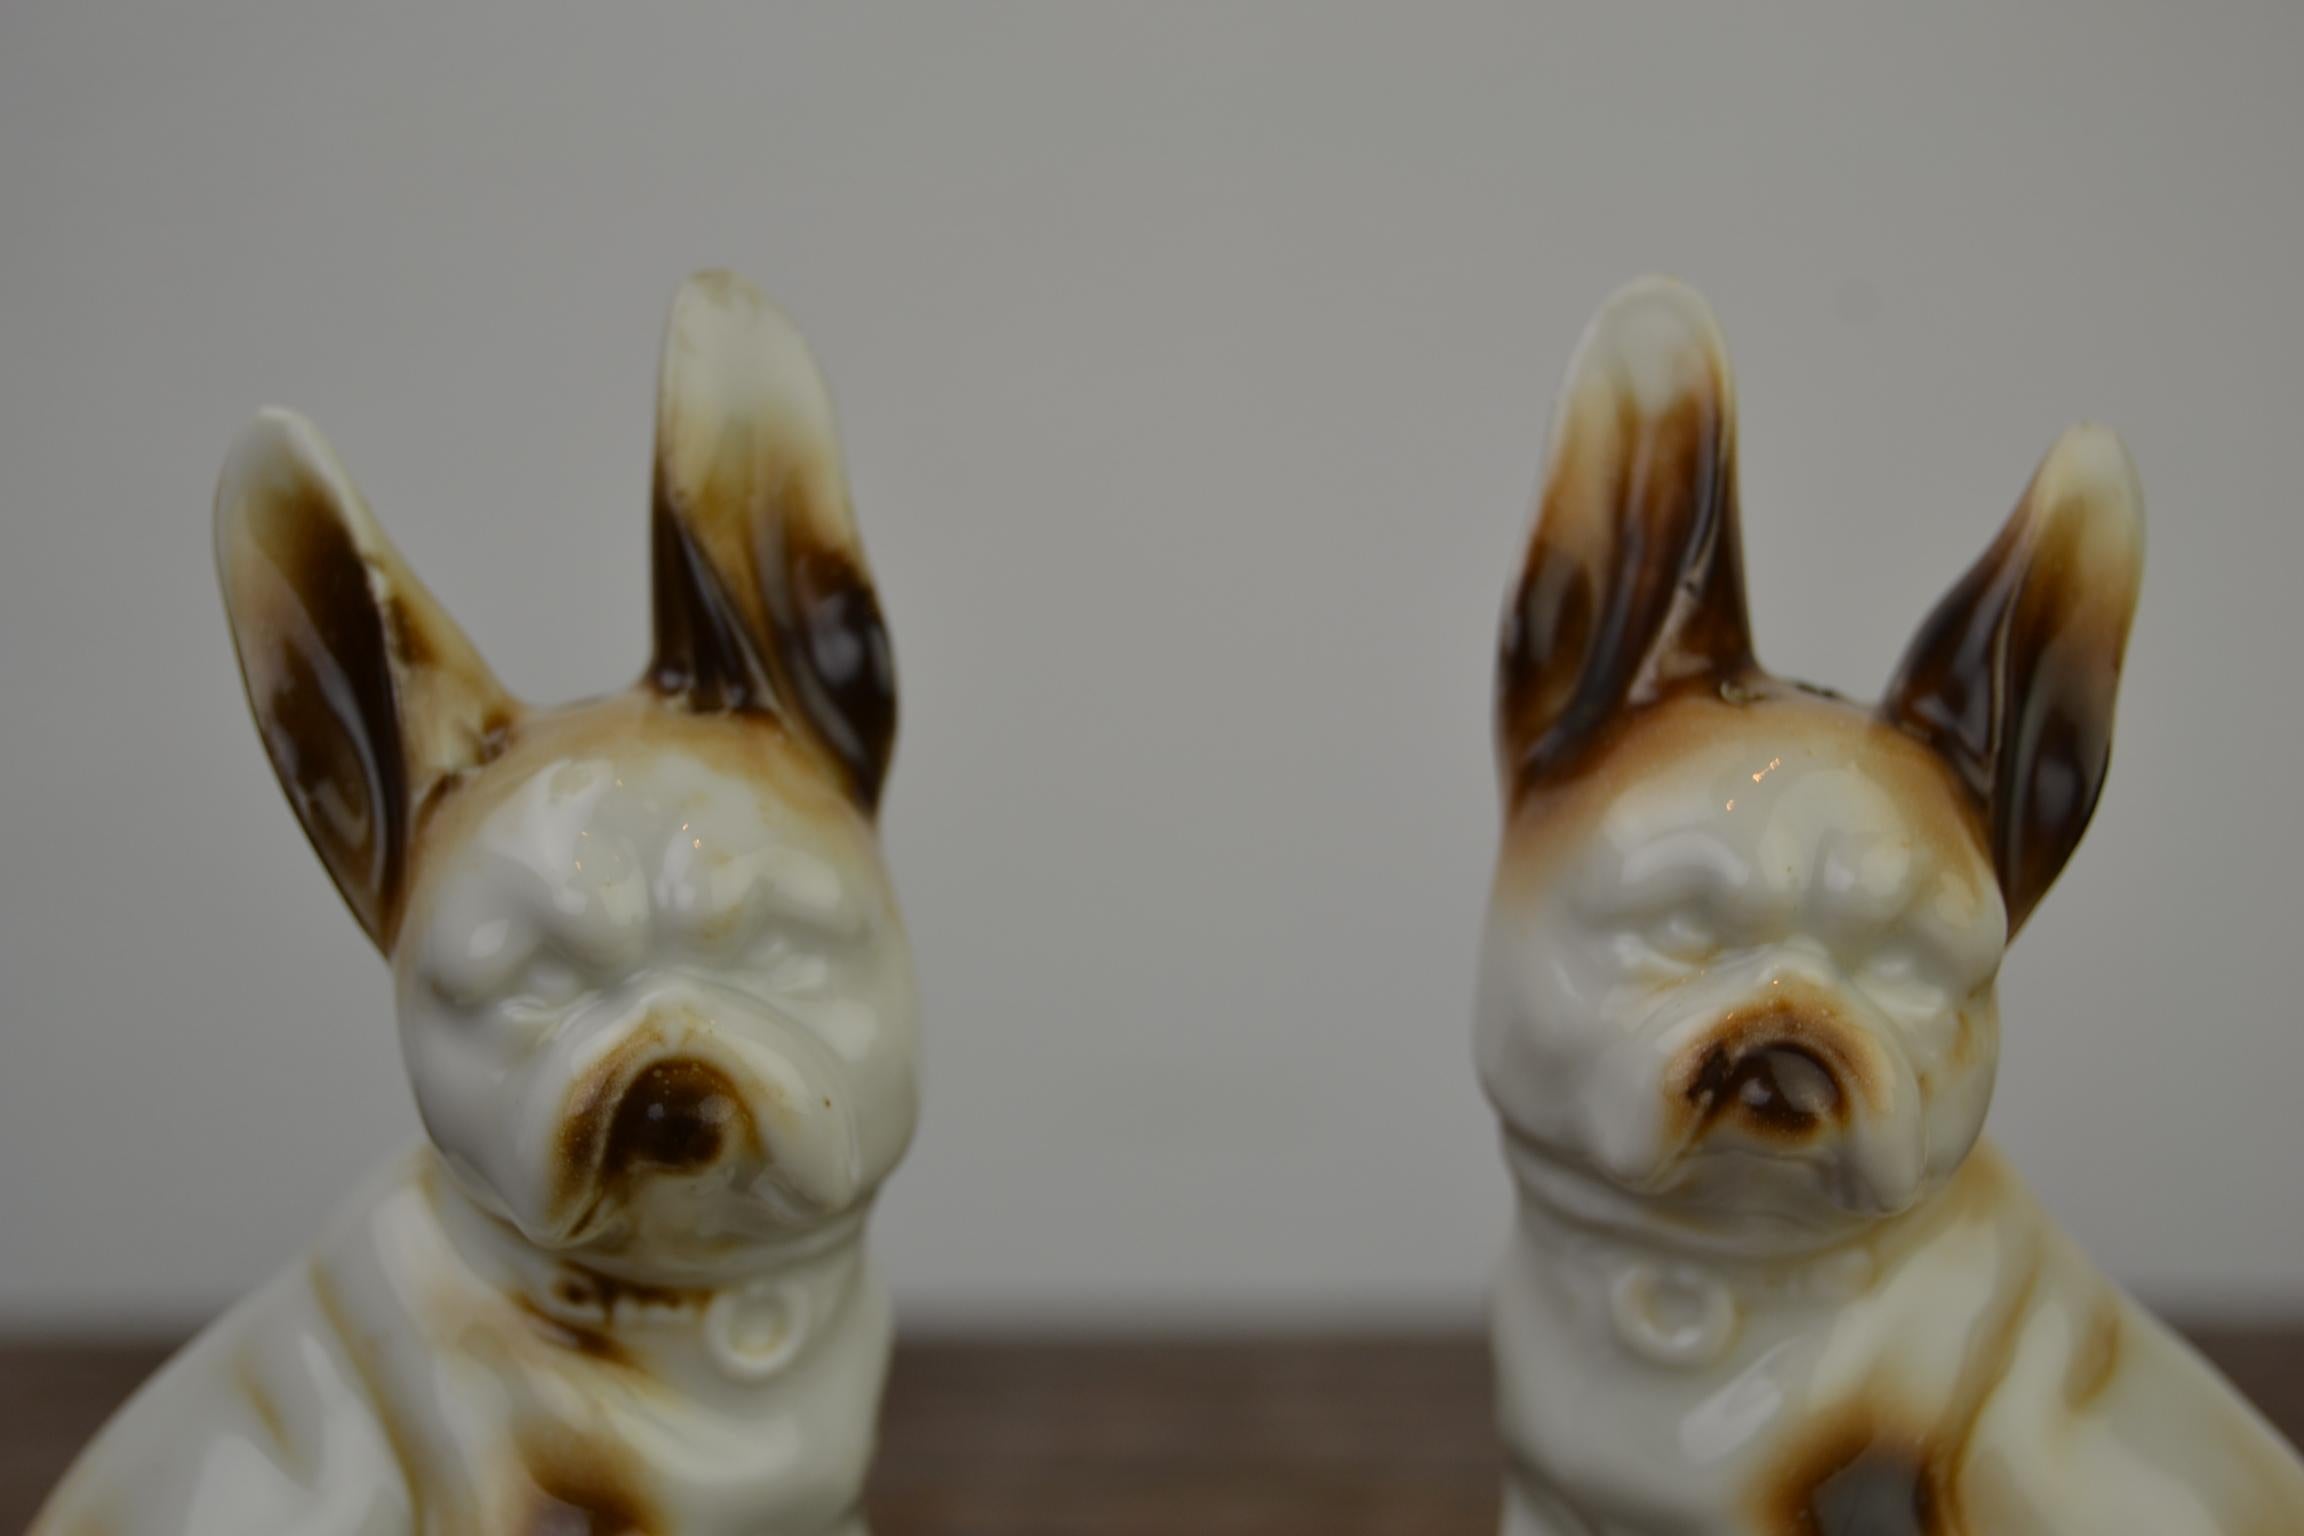 Porcelain bulldog shaped salt and pepper shakers.
These bulldogs with rabbit ears have the colors white and brown, are very detailed and both still have their cork.
They are marked at the bottom: Germany - 10206.
These animal salt and pepper